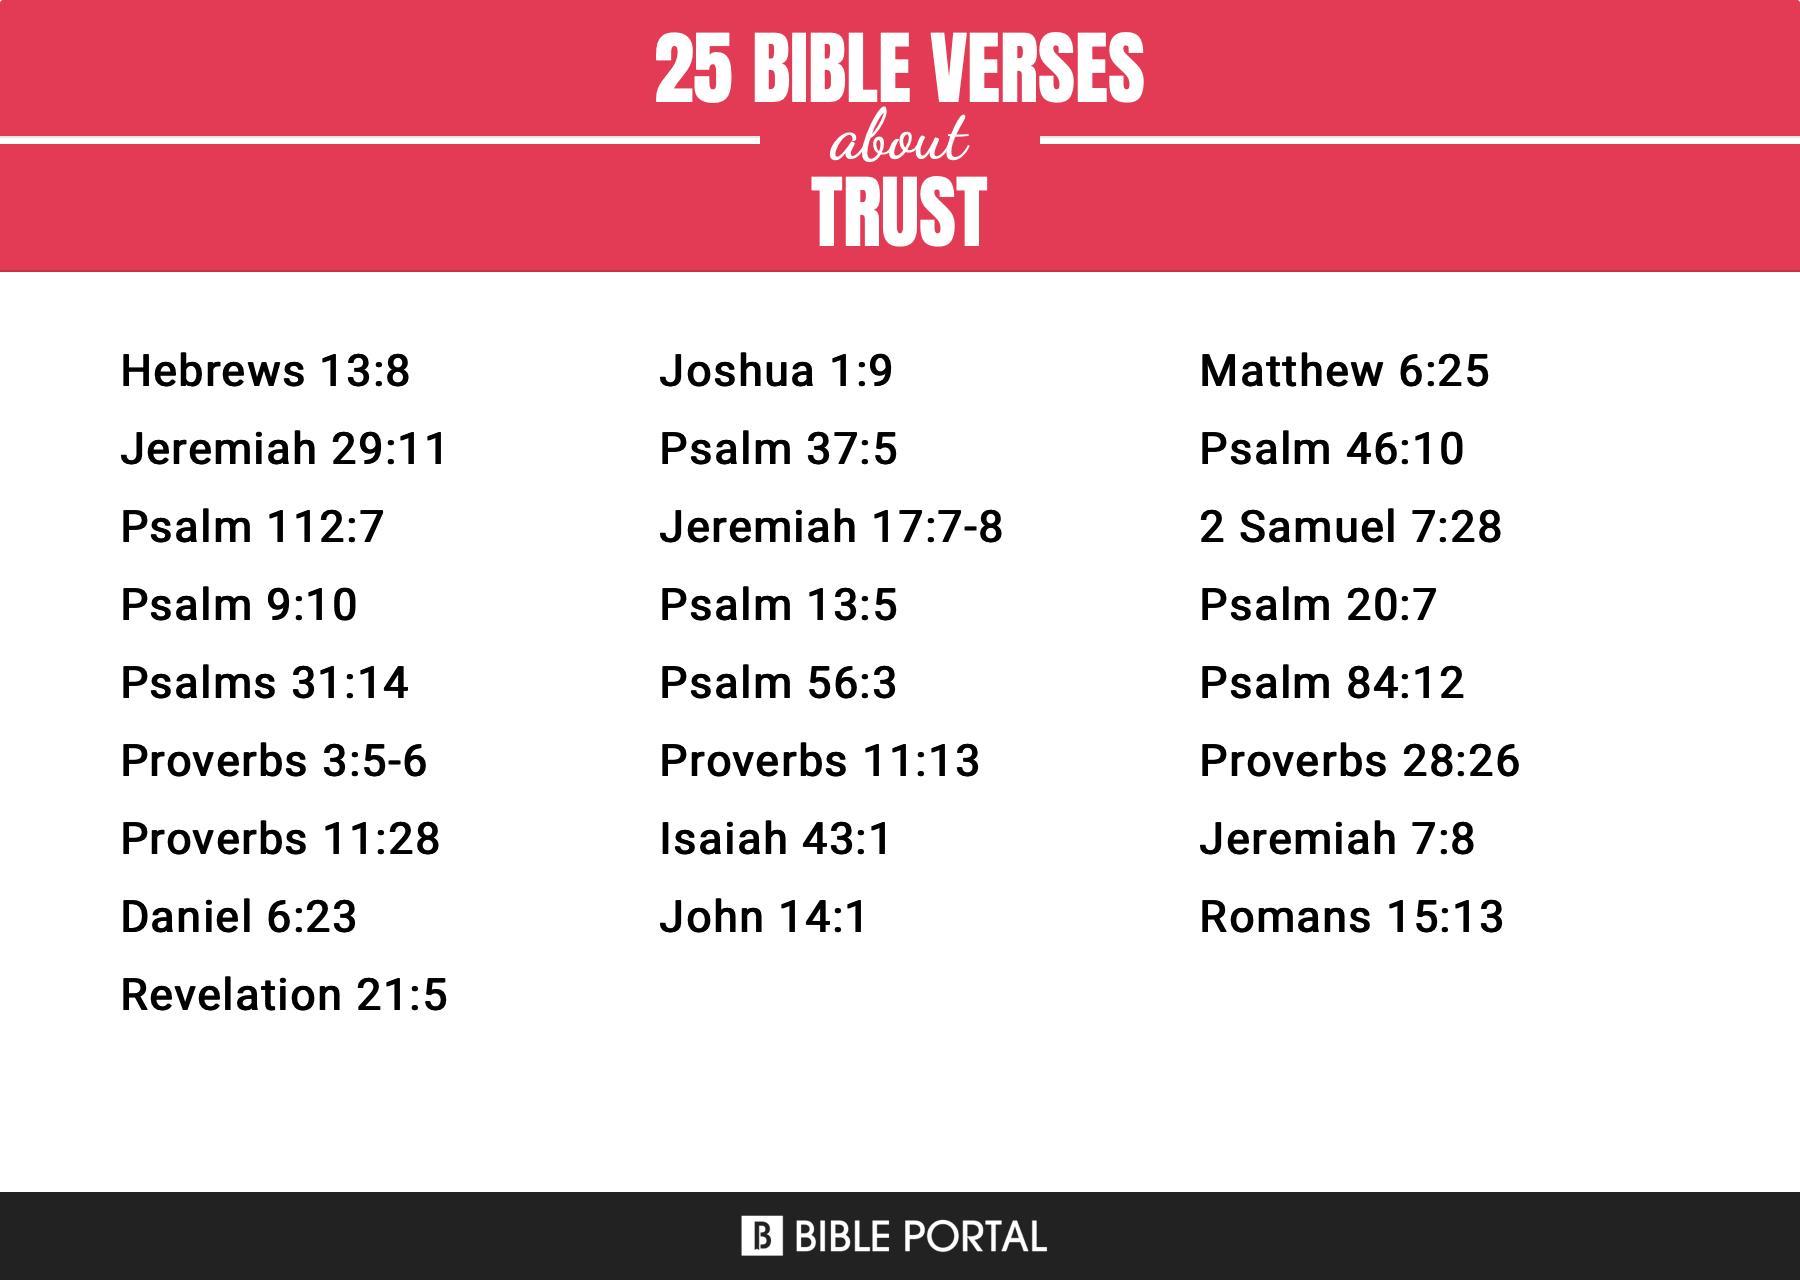 What Does the Bible Say about Trust?